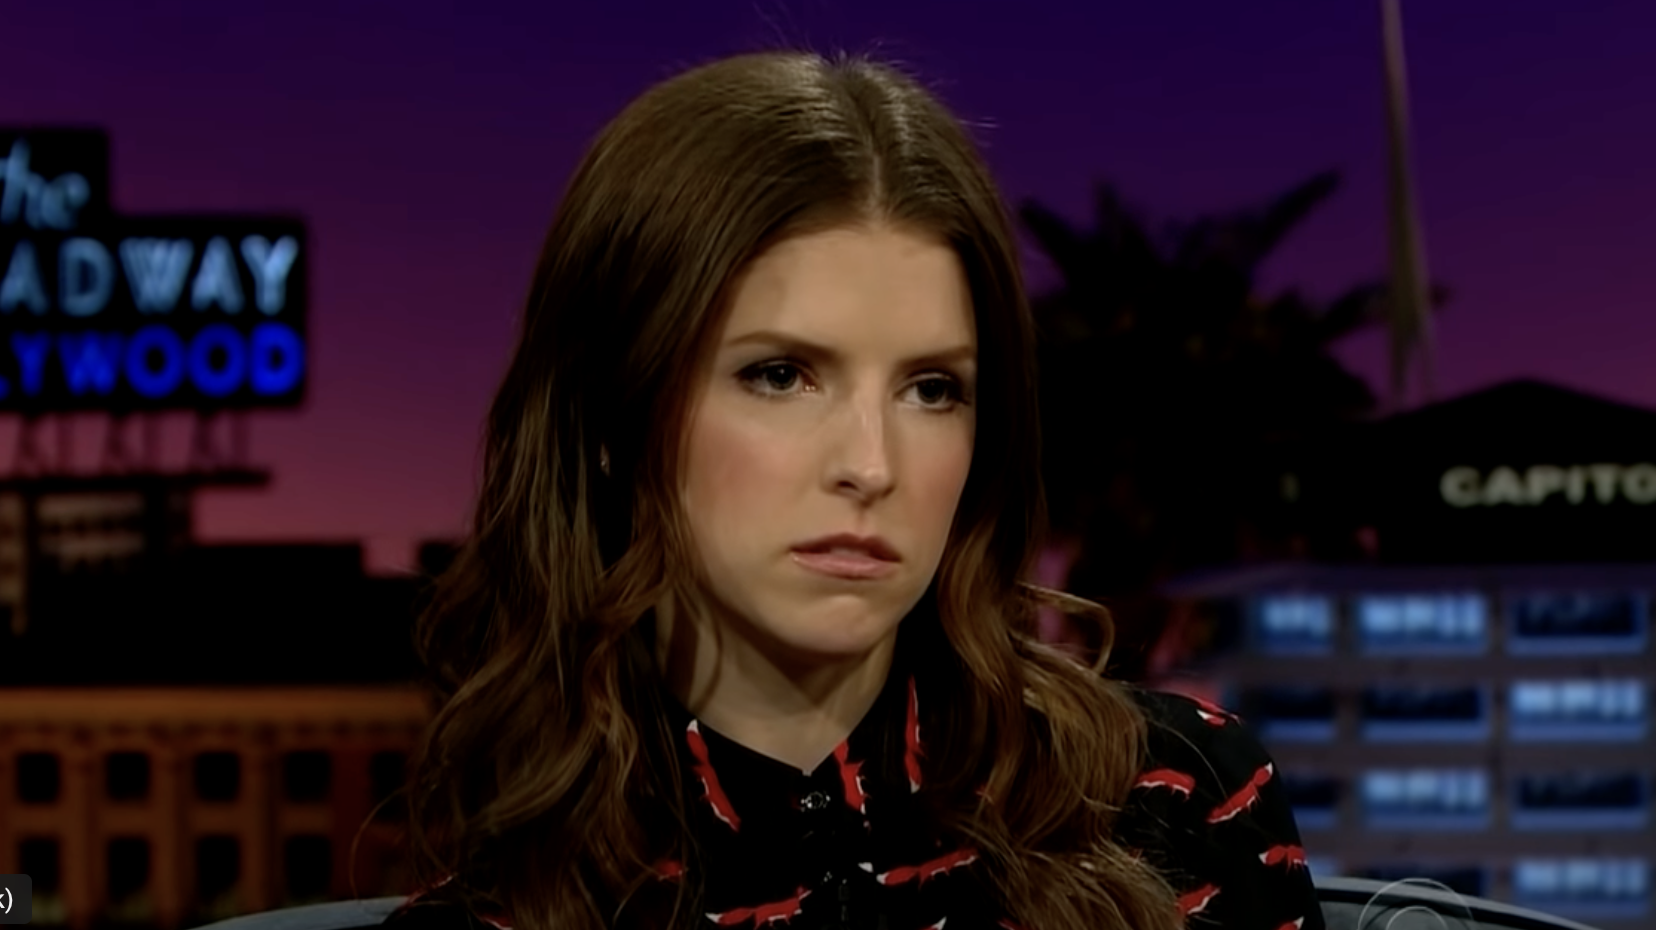 Woman with a concerned expression wearing a printed blouse, sitting in a TV show setting